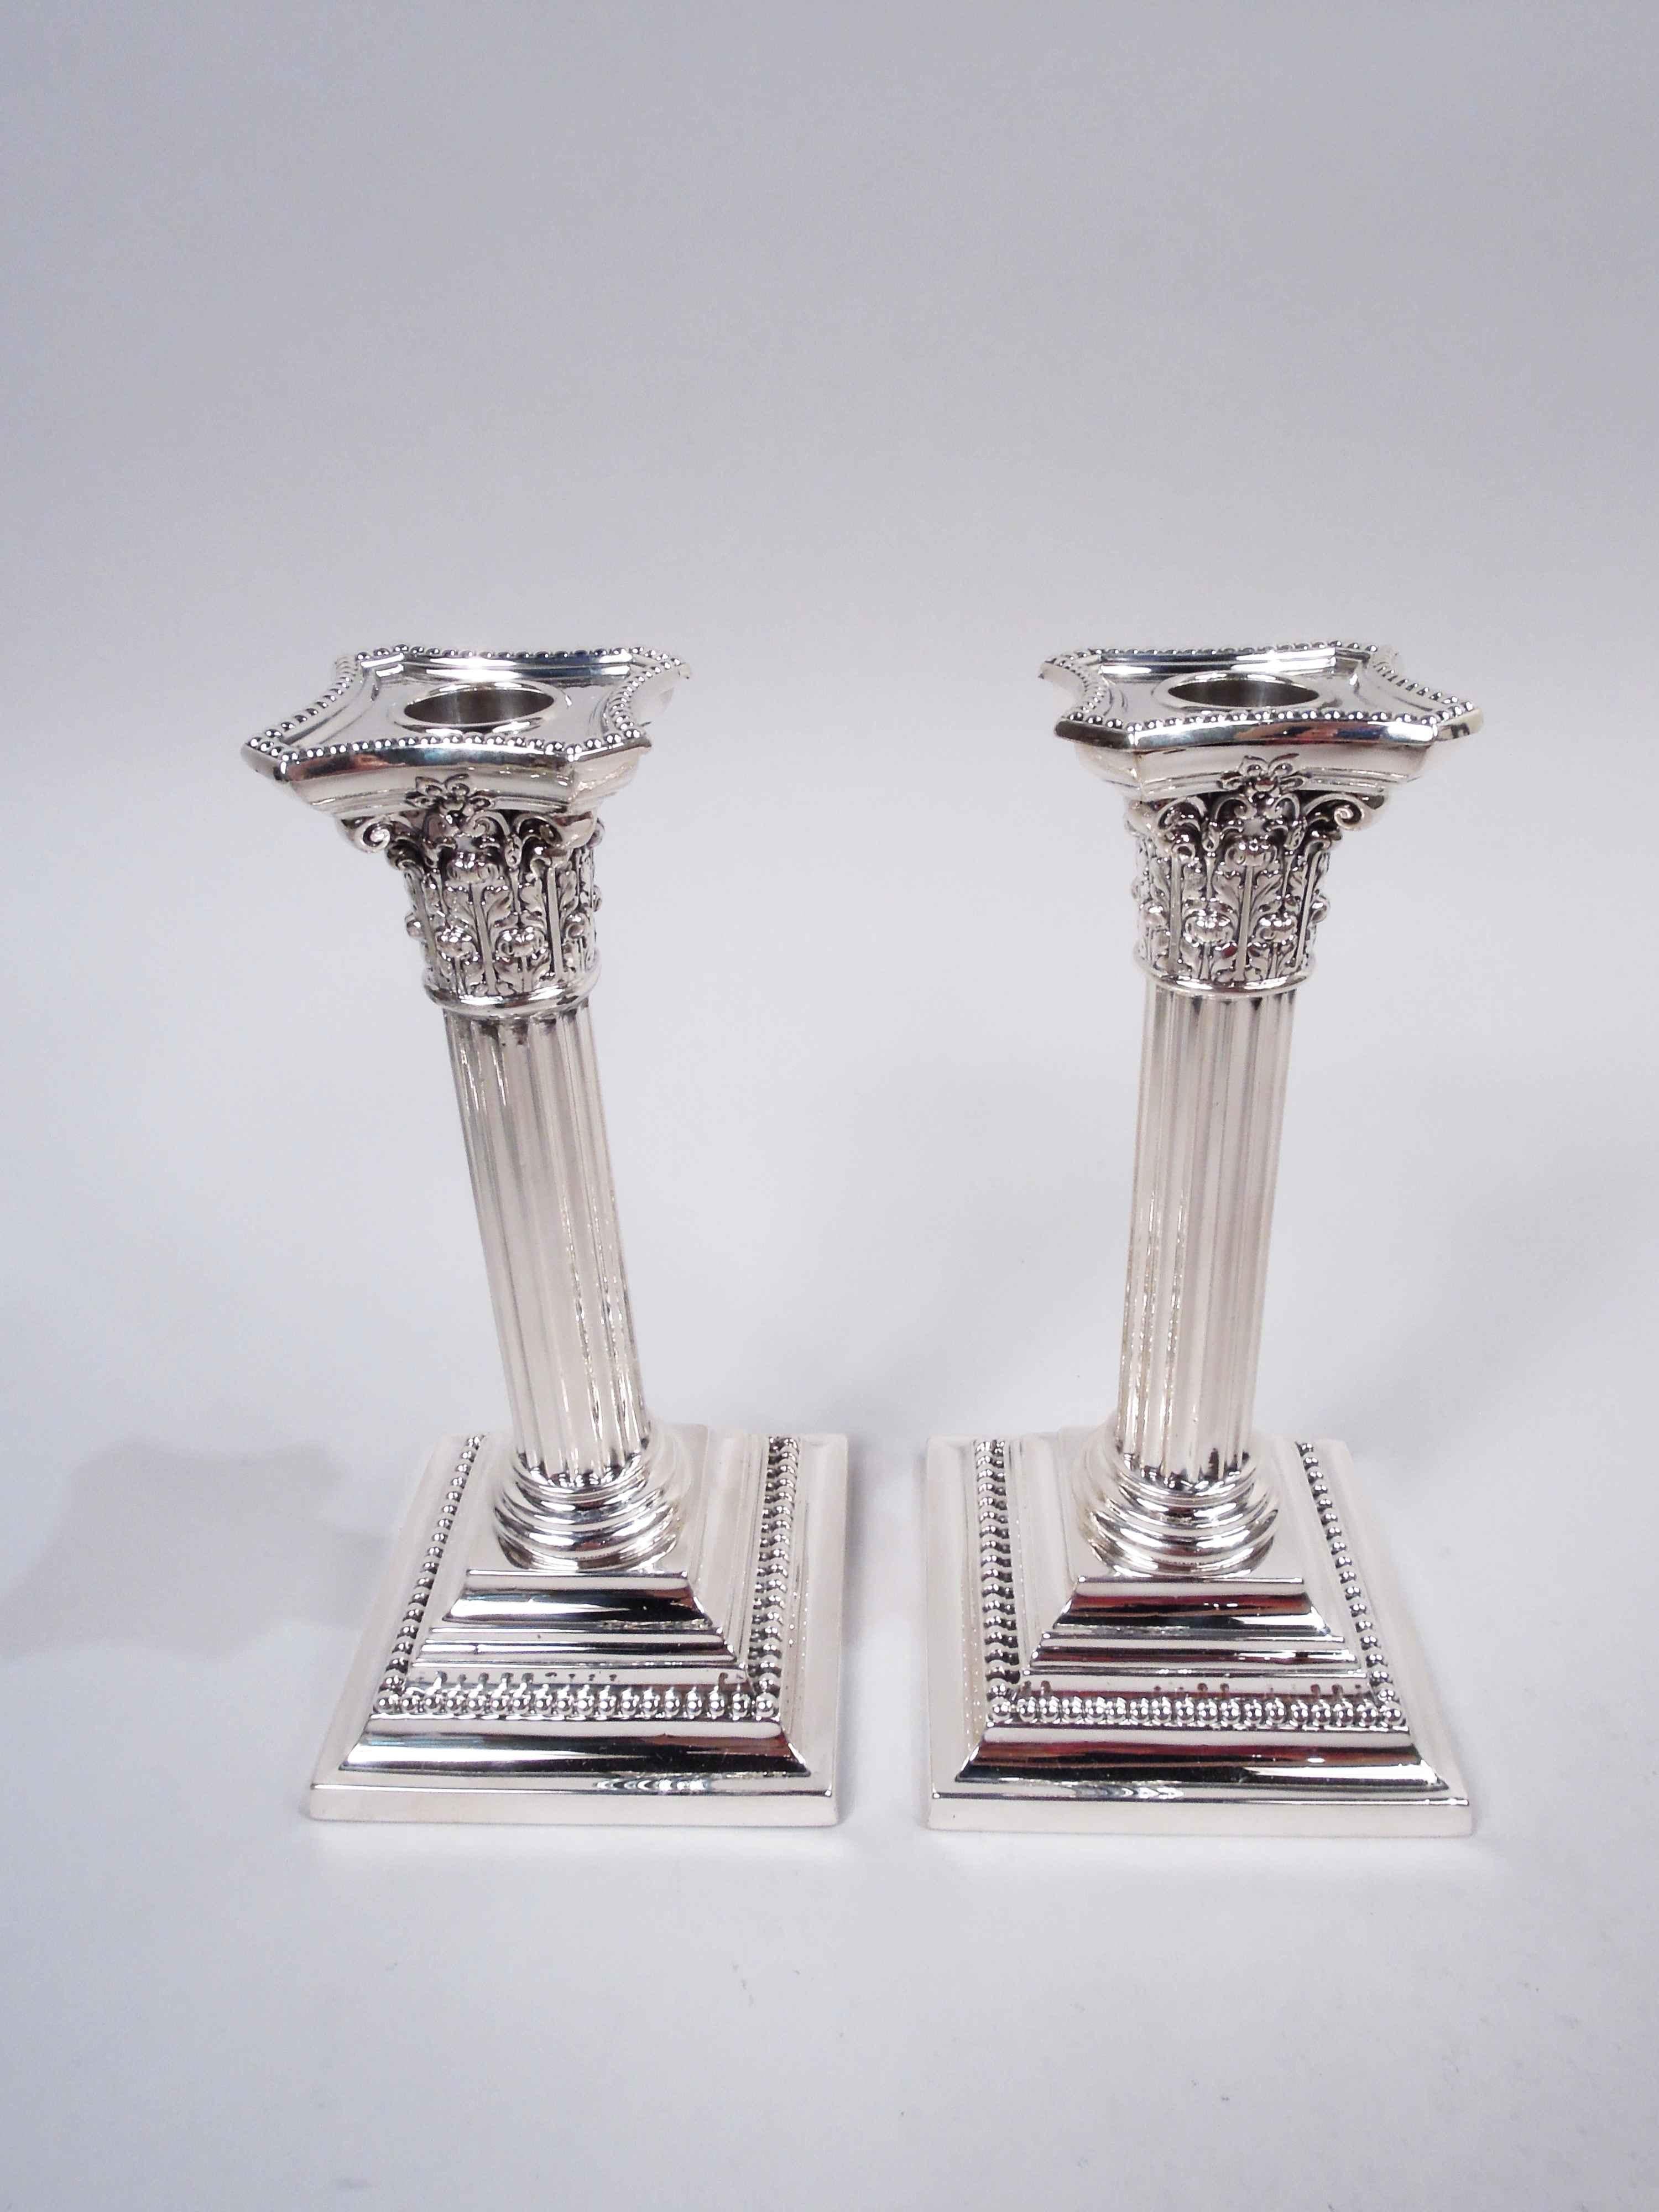 Pair of Edwardian Classical sterling silver column candlesticks. Made by Gorham in Providence, ca 1910. Each: Column with fluted shaft on stepped square base. Corinthian capital with chamfered and concave bobeche. Beading. Fully marked including